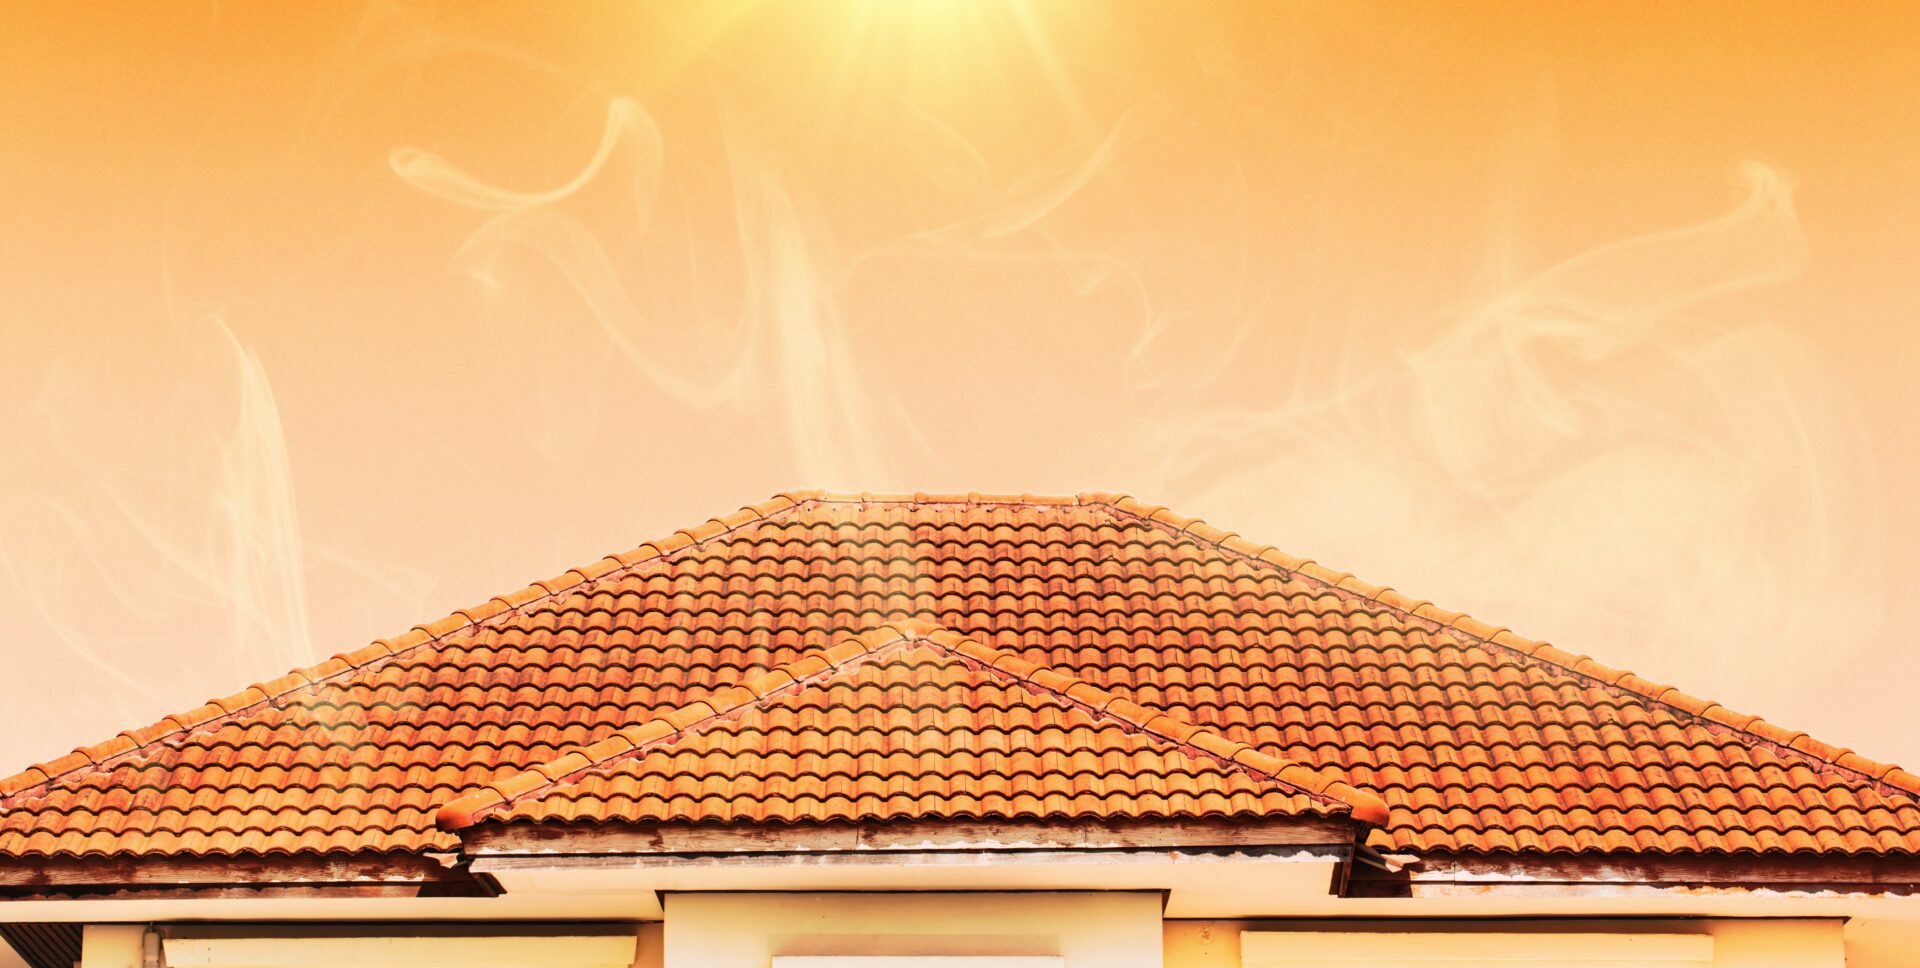 The scorching heat of summer is much less noticeable with ceiling insulation installed.